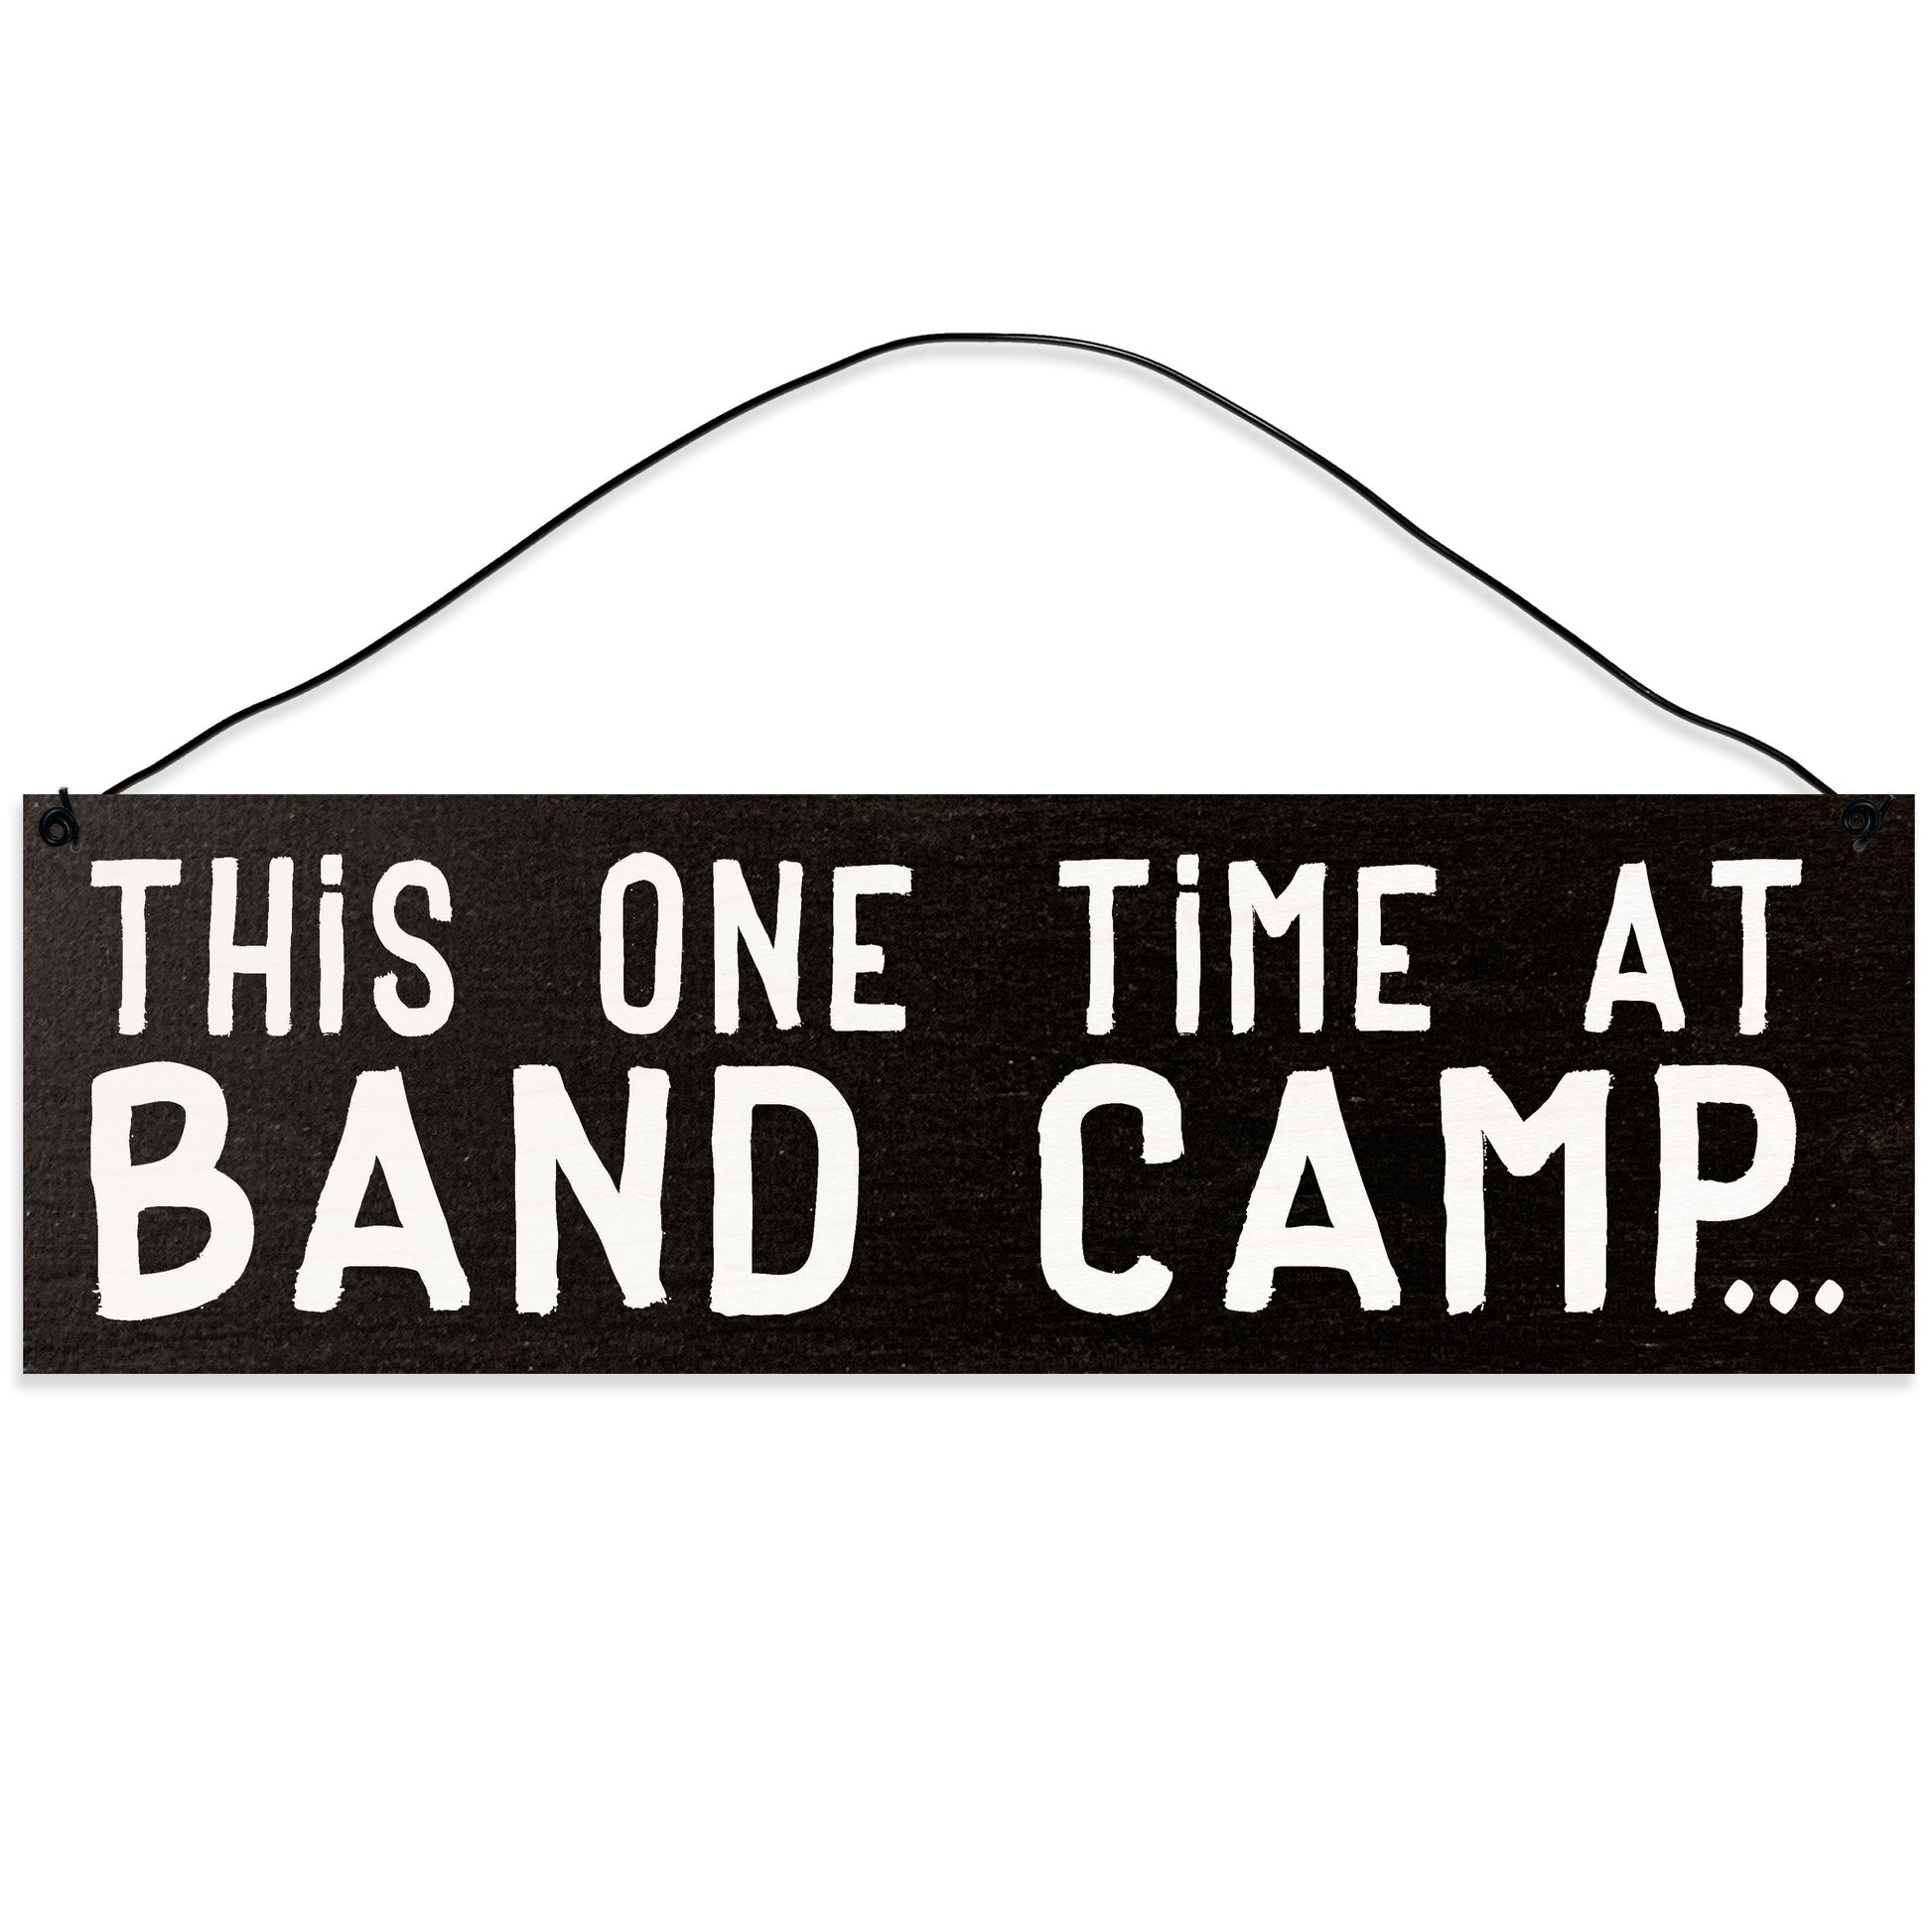 Sawyer's Mill - This One Time at Band Camp. Wood Sign for Home or Office. Measures 3x10 inches.